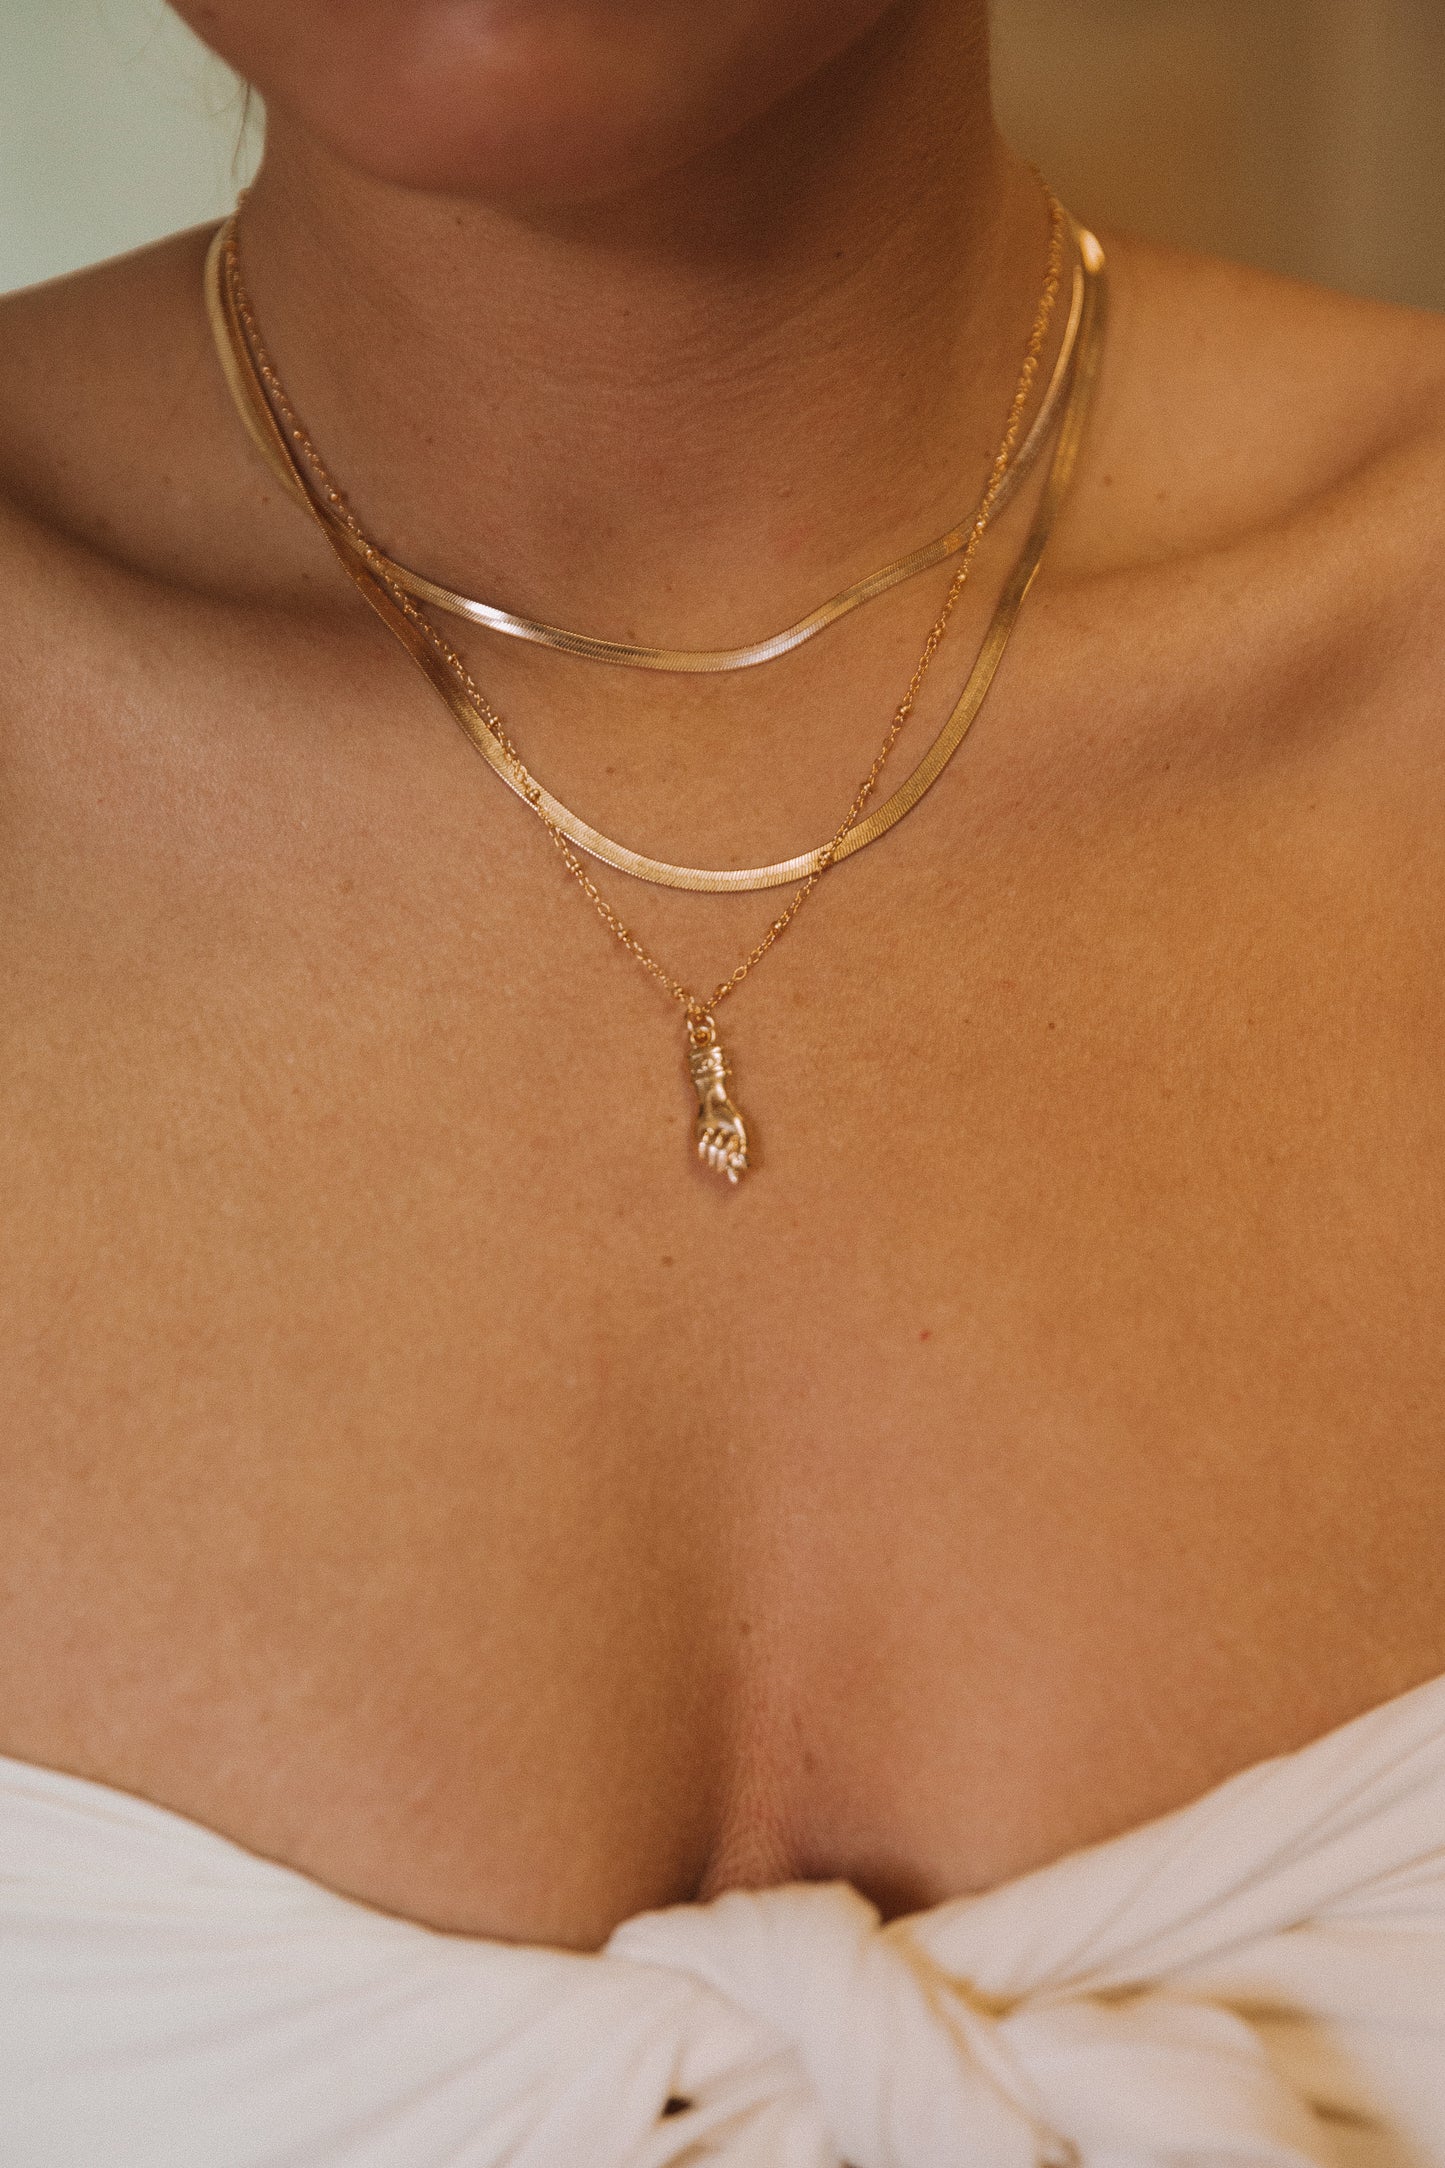 The Figa Hand Necklace